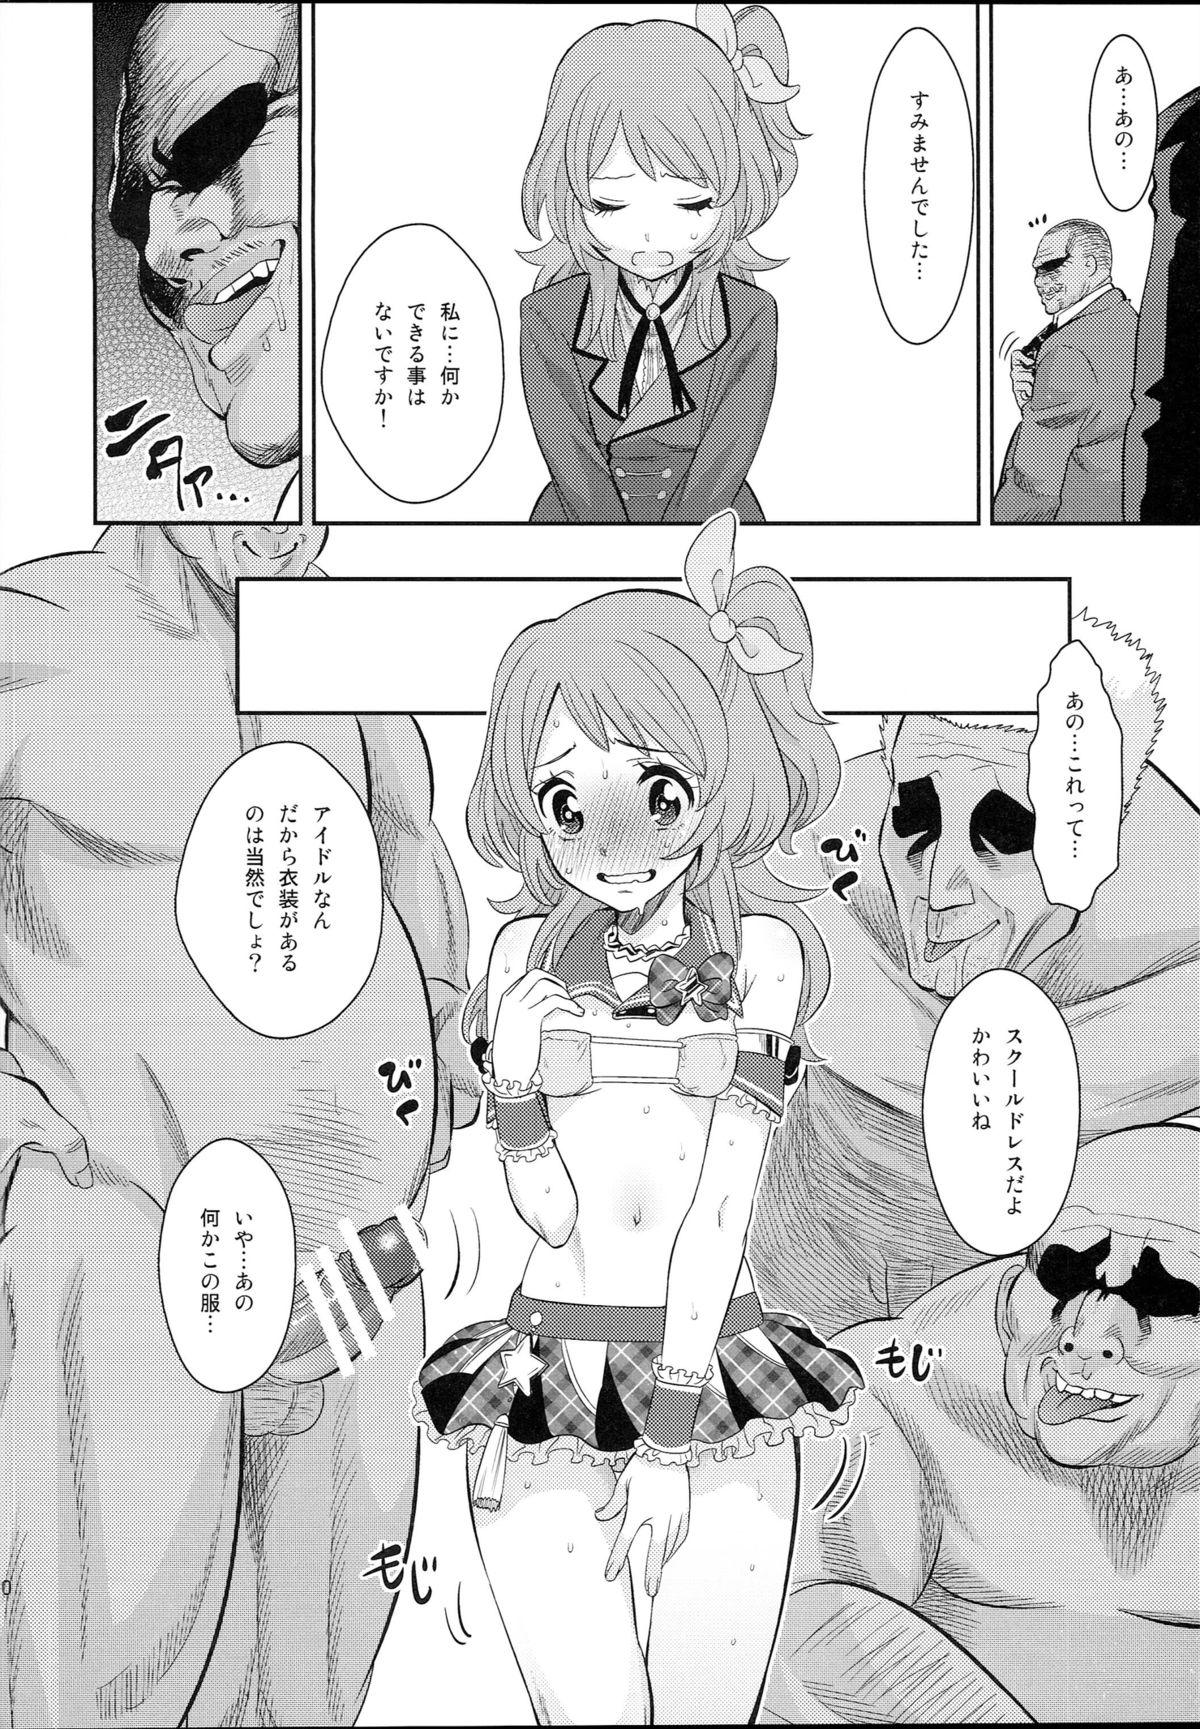 Butt Fuck IT WAS A good EXPERiENCE - Aikatsu Tanned - Page 10